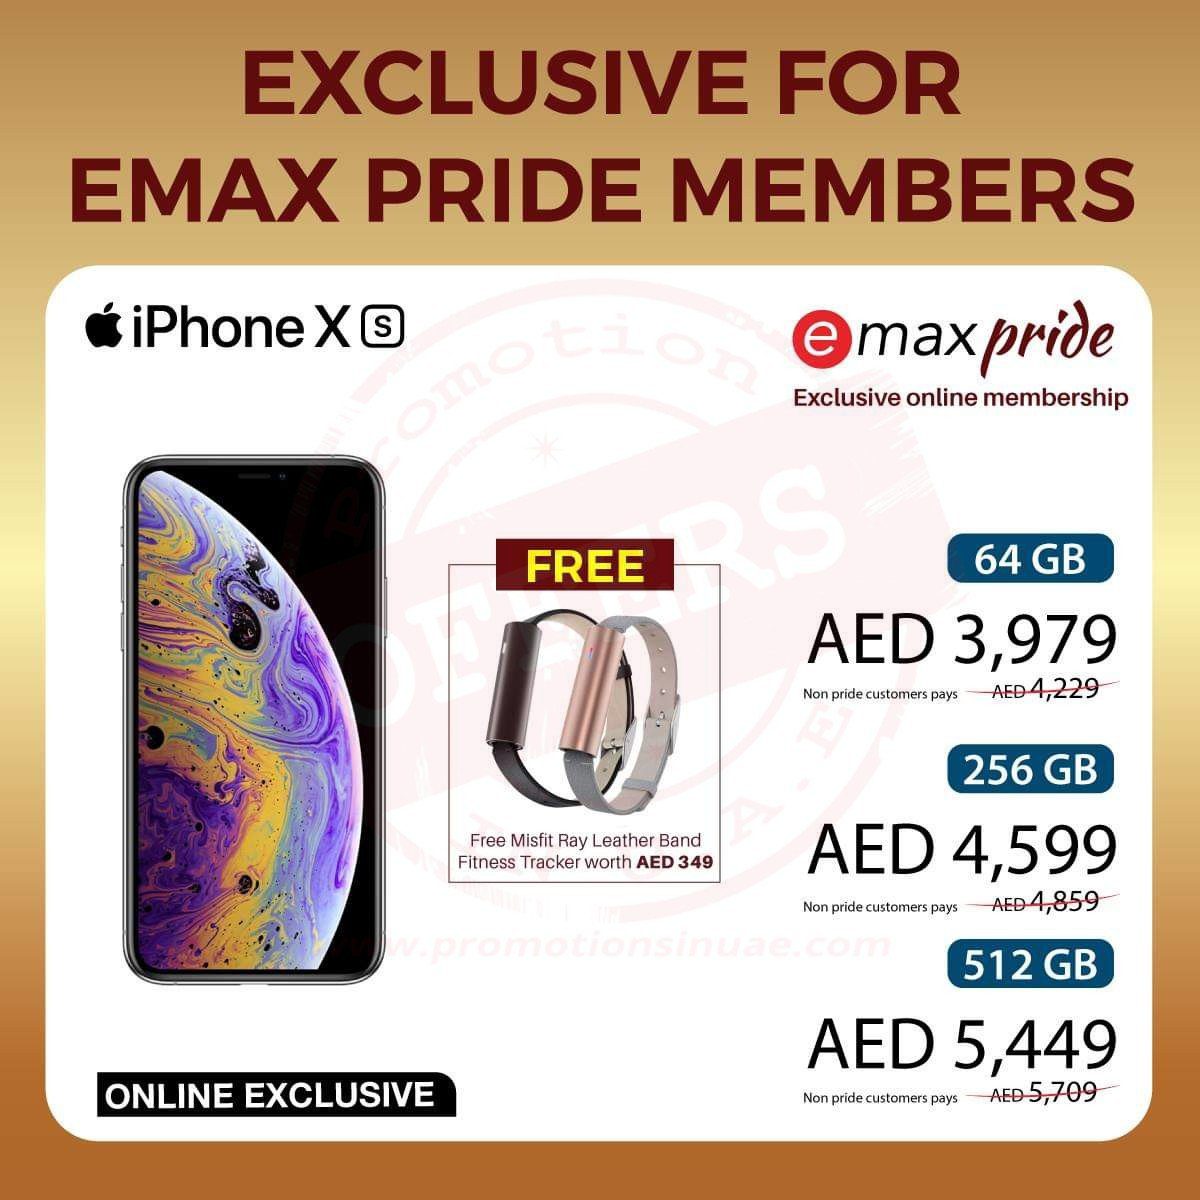 FB IMG 1540883985011 Become an Emax Pride member & avail exclusive prices on iPhone XS & iPhone XR! Sign up today for Emax Pride membership only on Emax